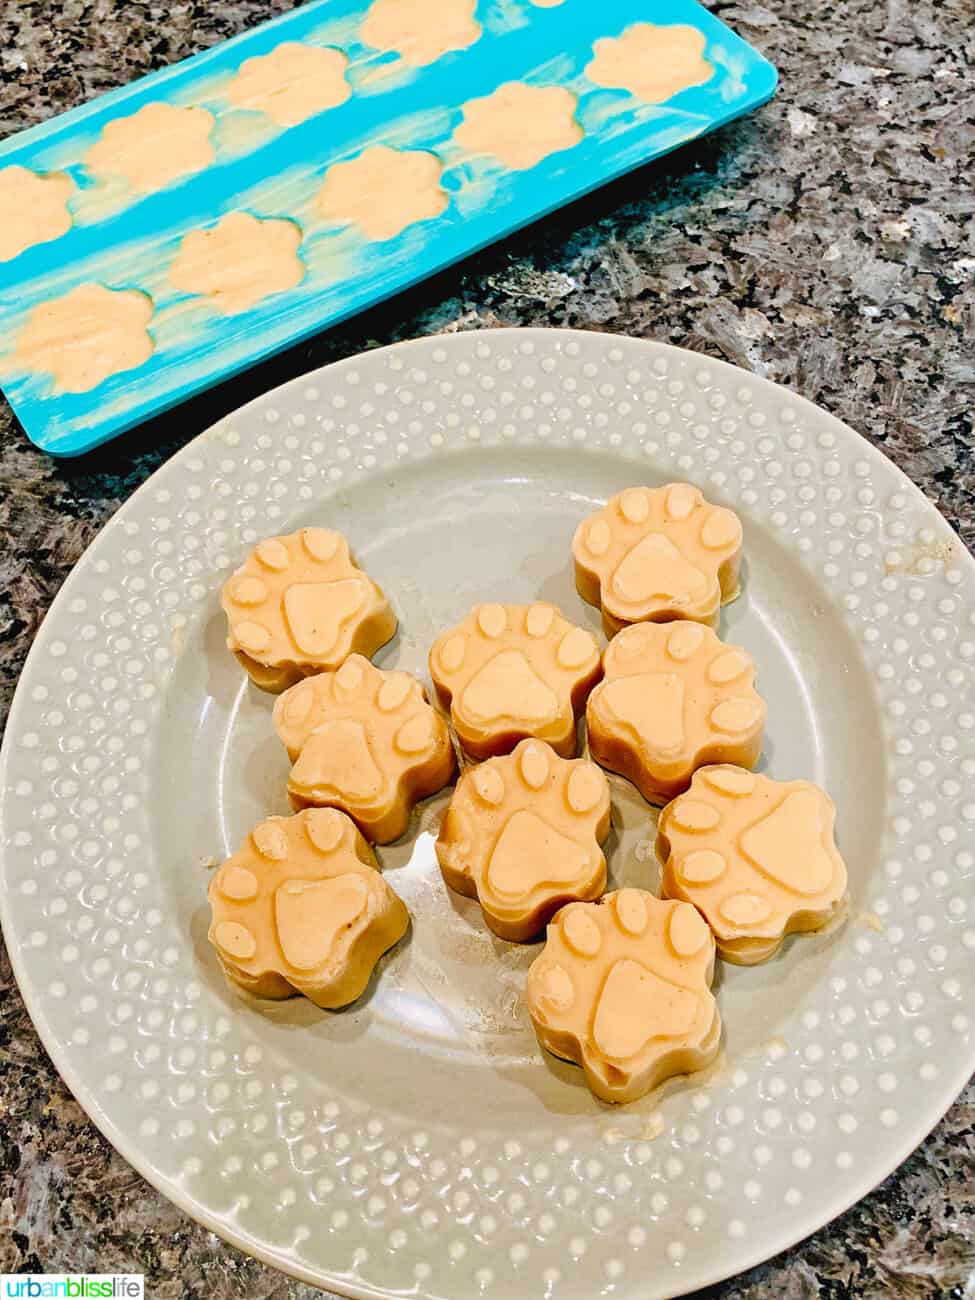 frozen peanut butter banana dog treats on a plate with some in the mold